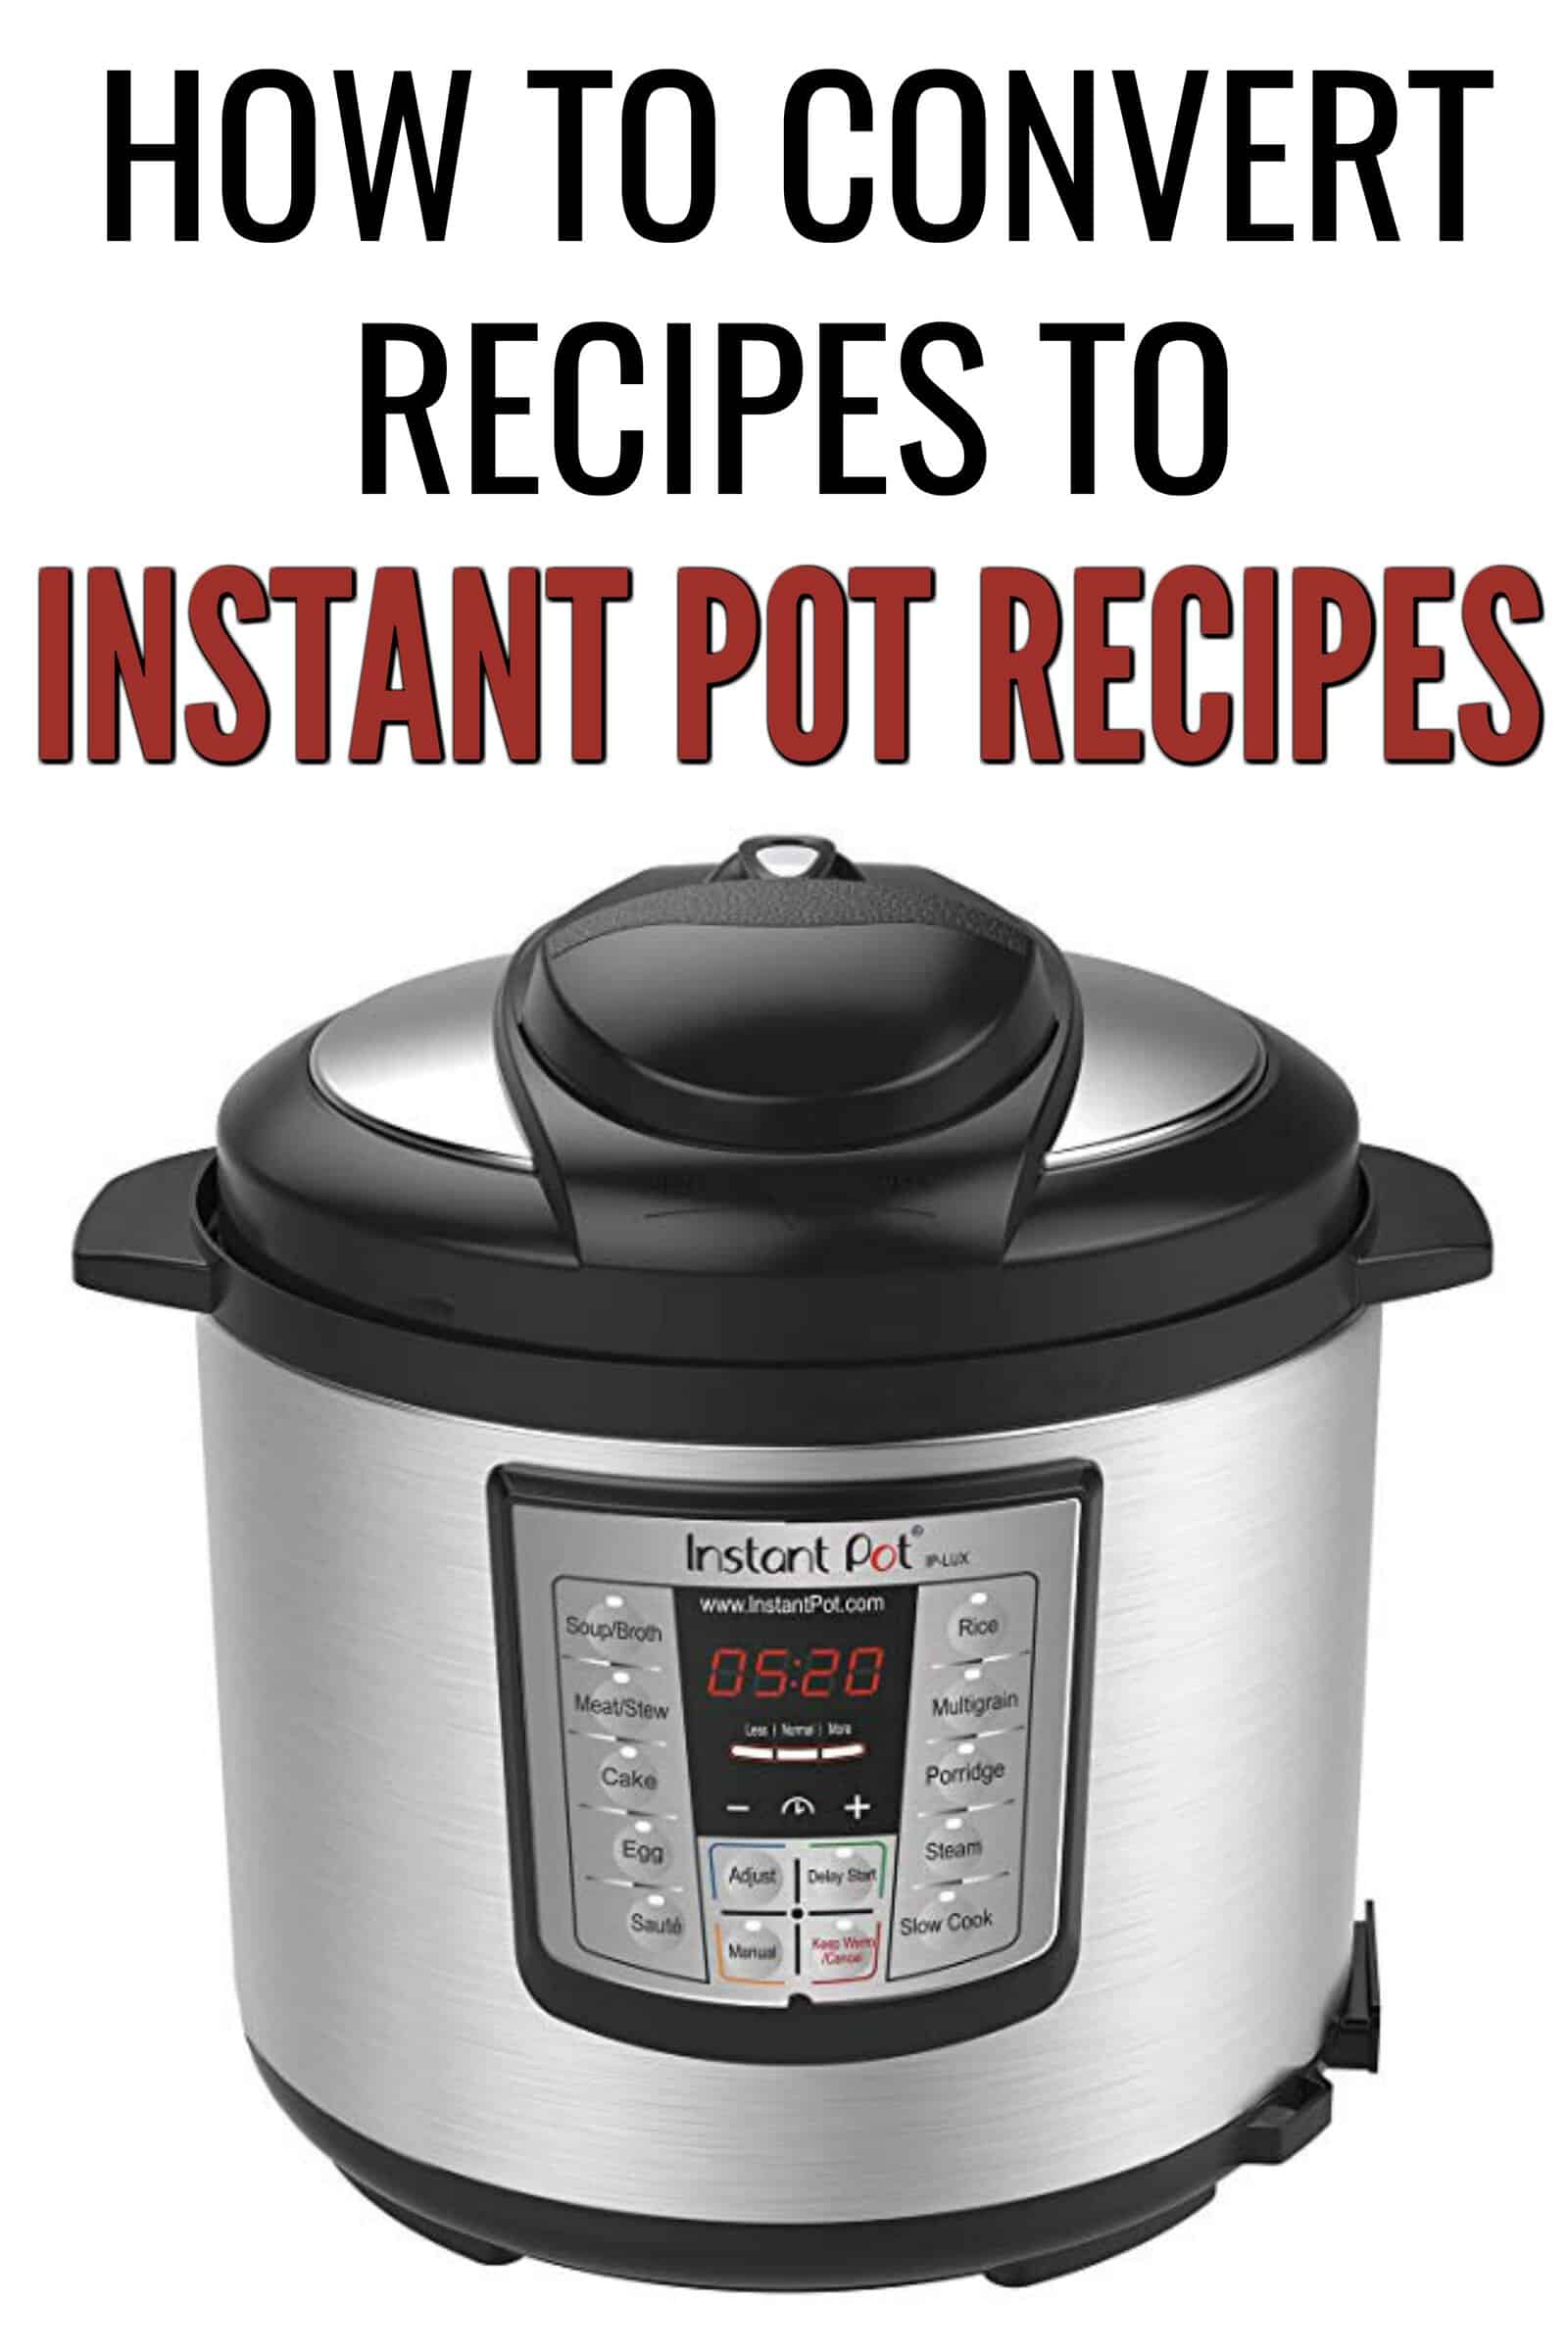 https://www.sixsistersstuff.com/wp-content/uploads/2018/04/How20to20convert20recipes20to20instant20pot20recipes20from20SixSistersStuff.jpg